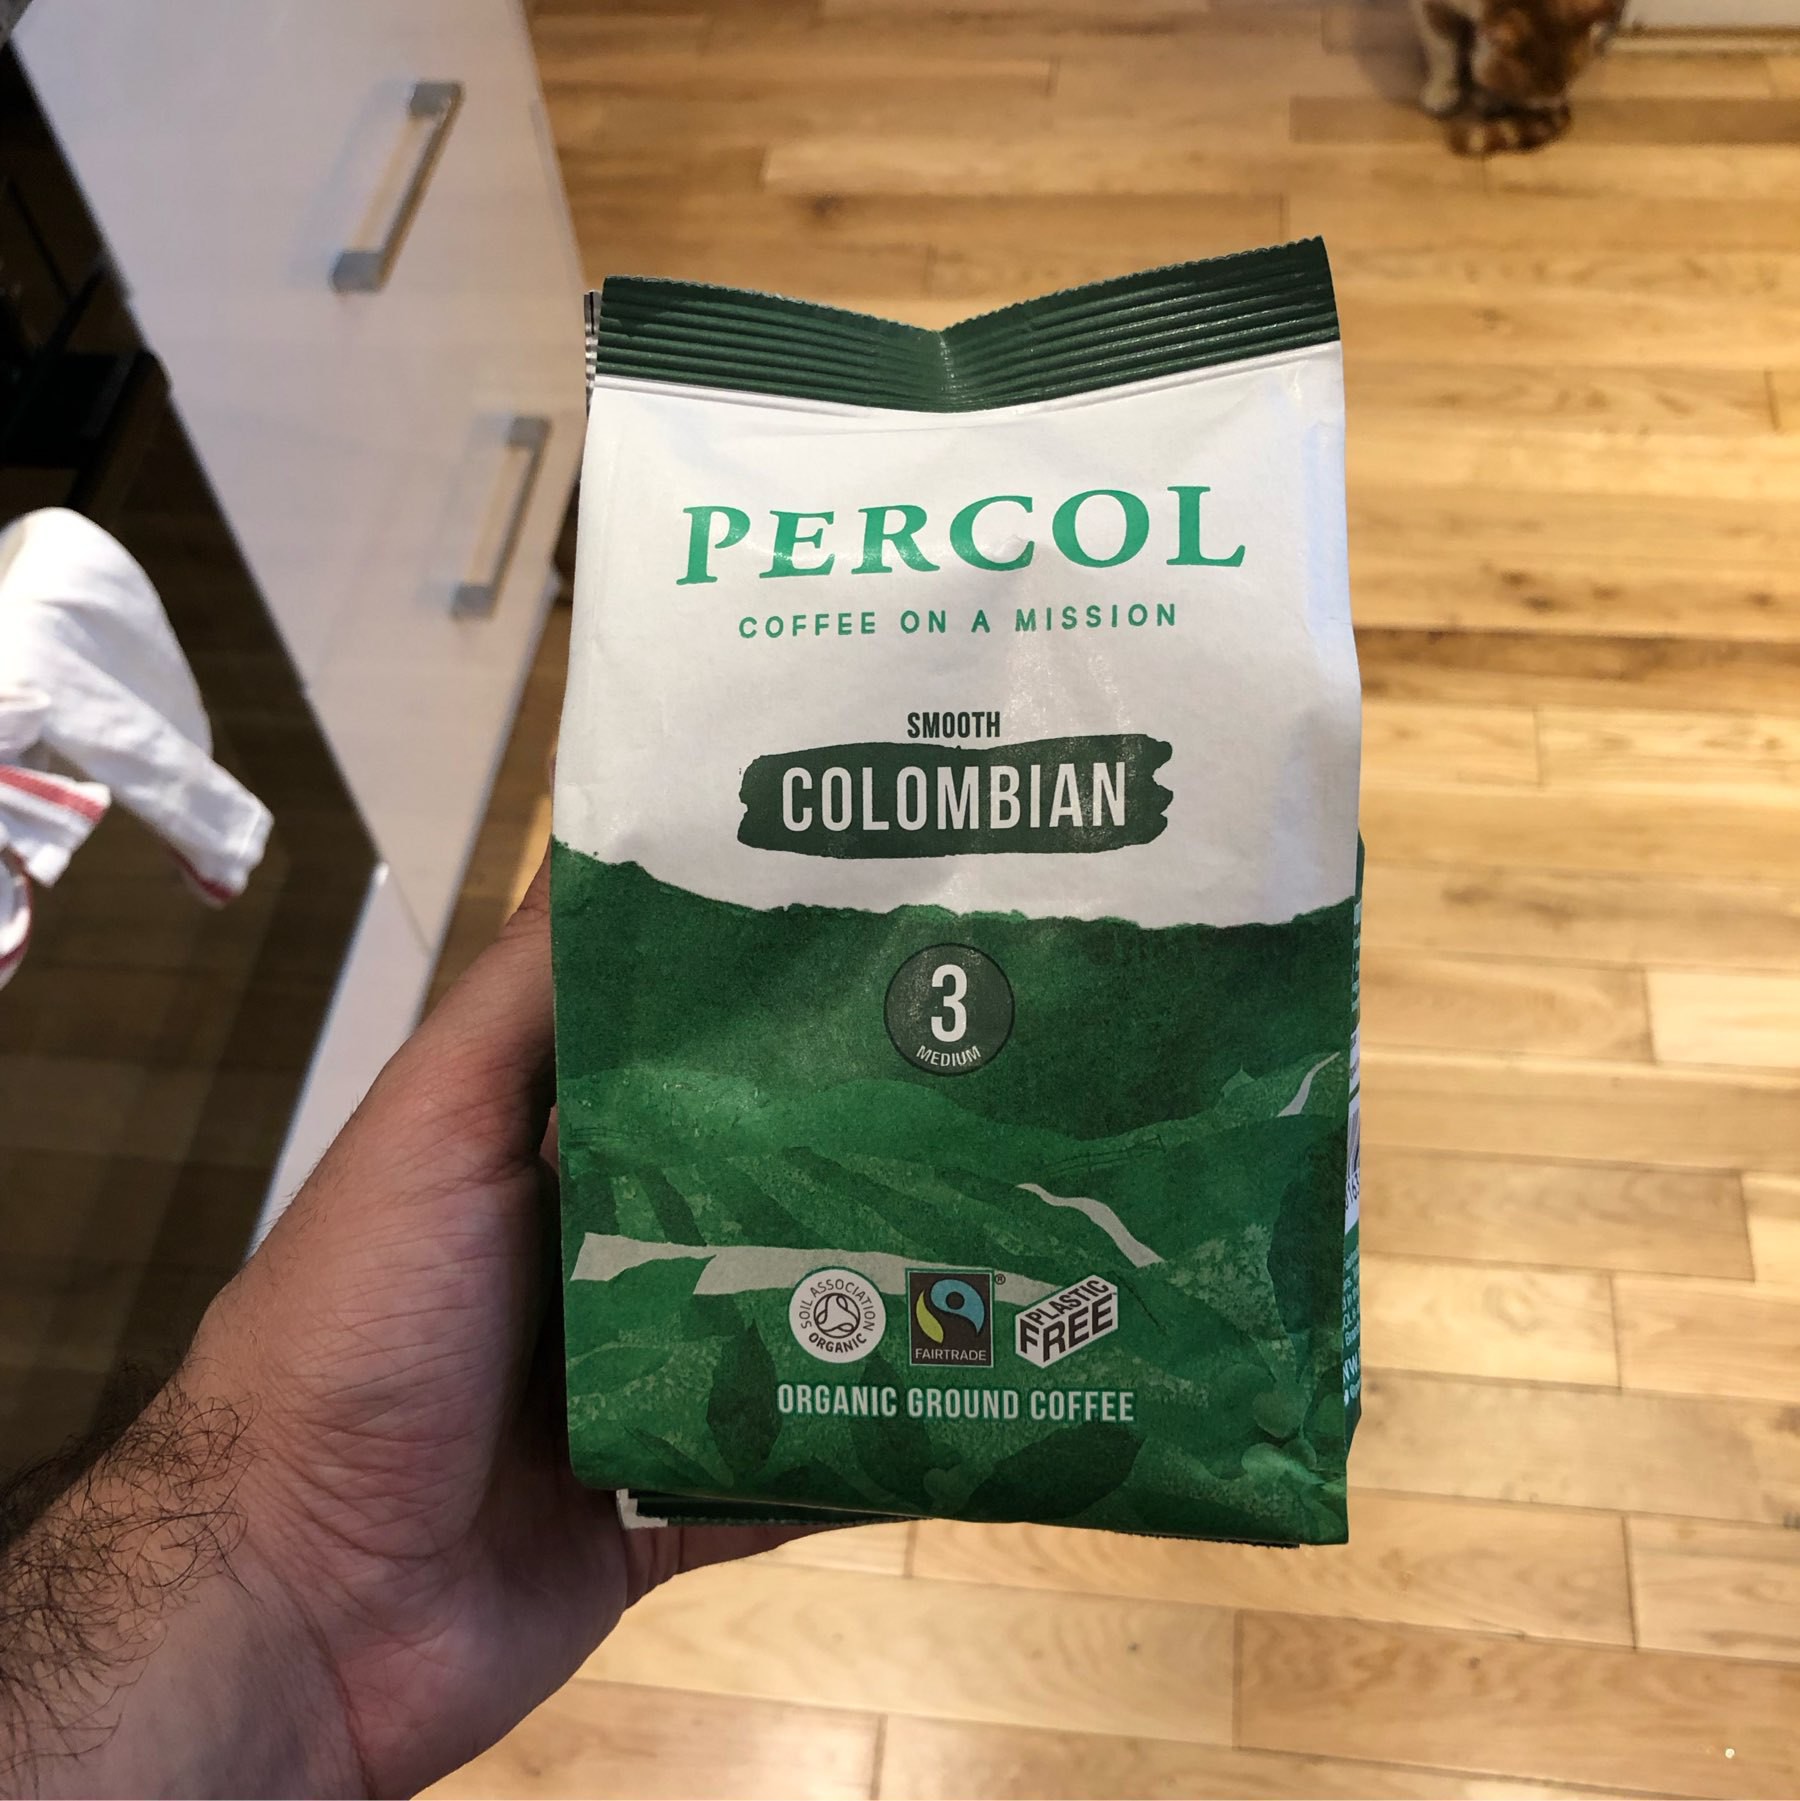 Green bag of Percol coffee with a note saying Plastic Free and Coffee on a mission